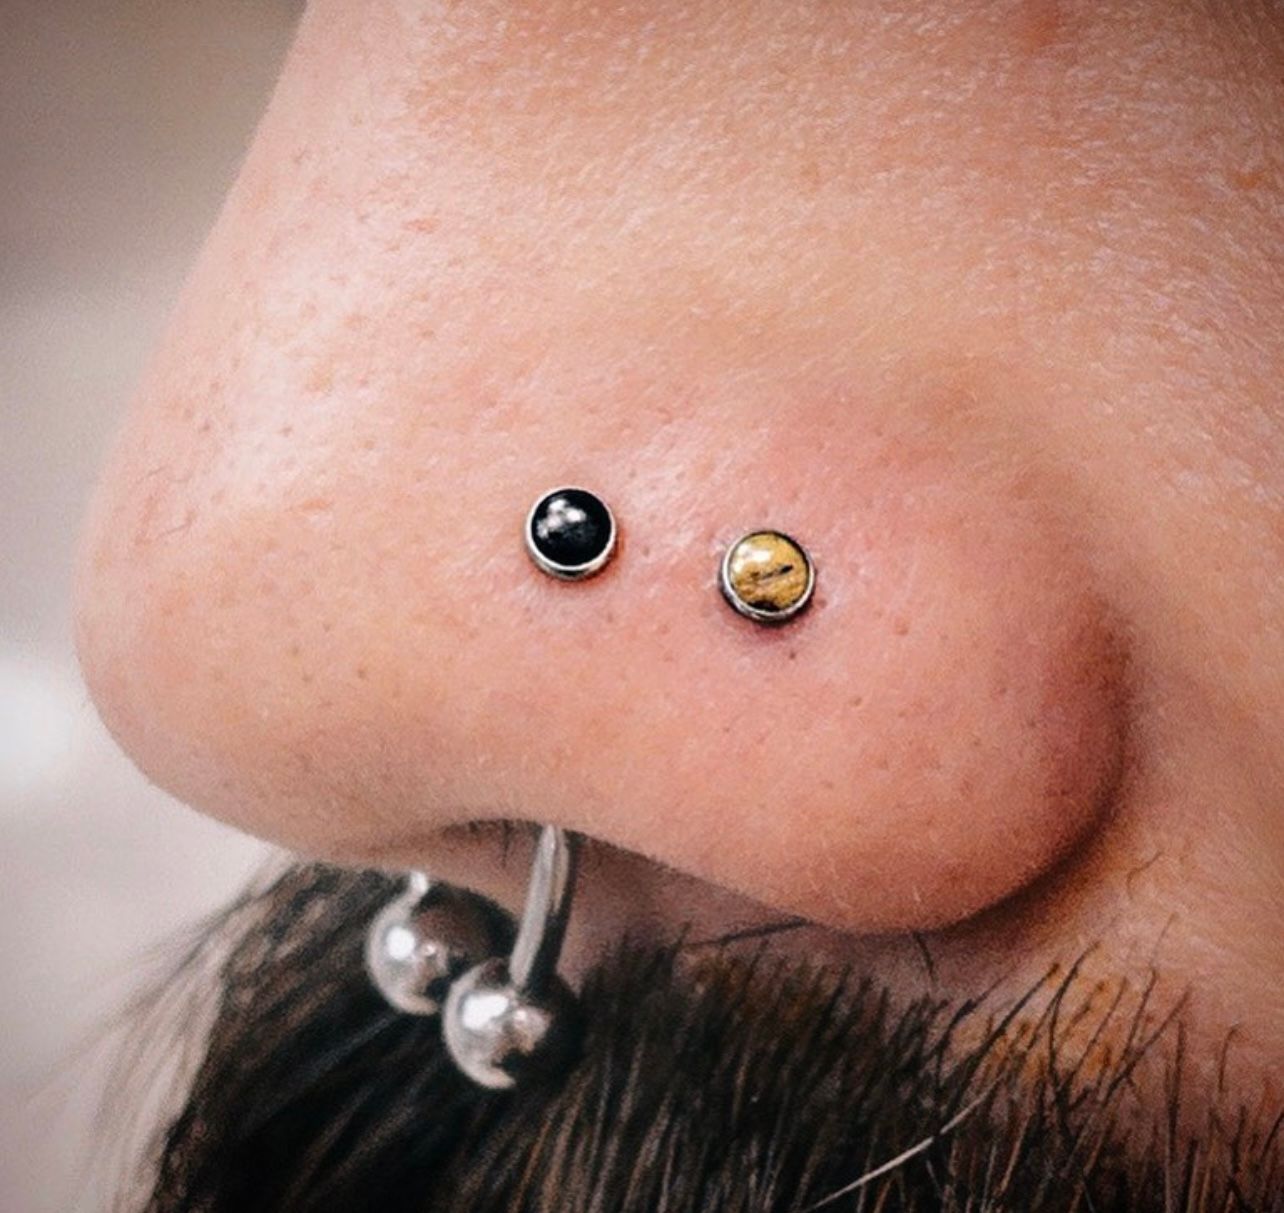 a close up of a person 's nose with two piercings .